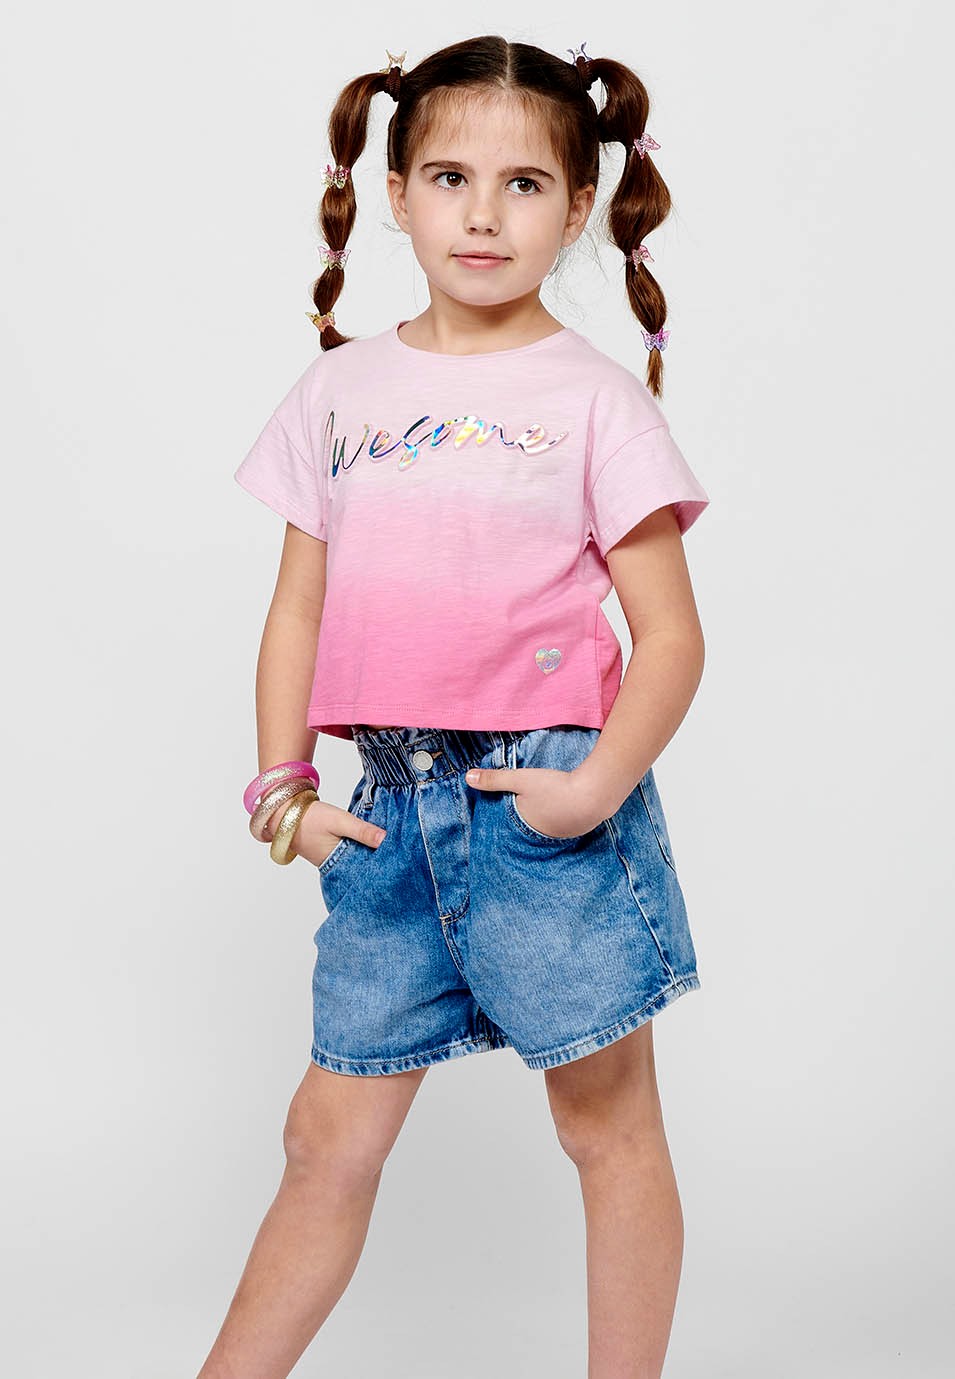 Short-sleeved T-shirt Cotton Top with Round Neck and Front Letters with Pink Volume for Girls 1